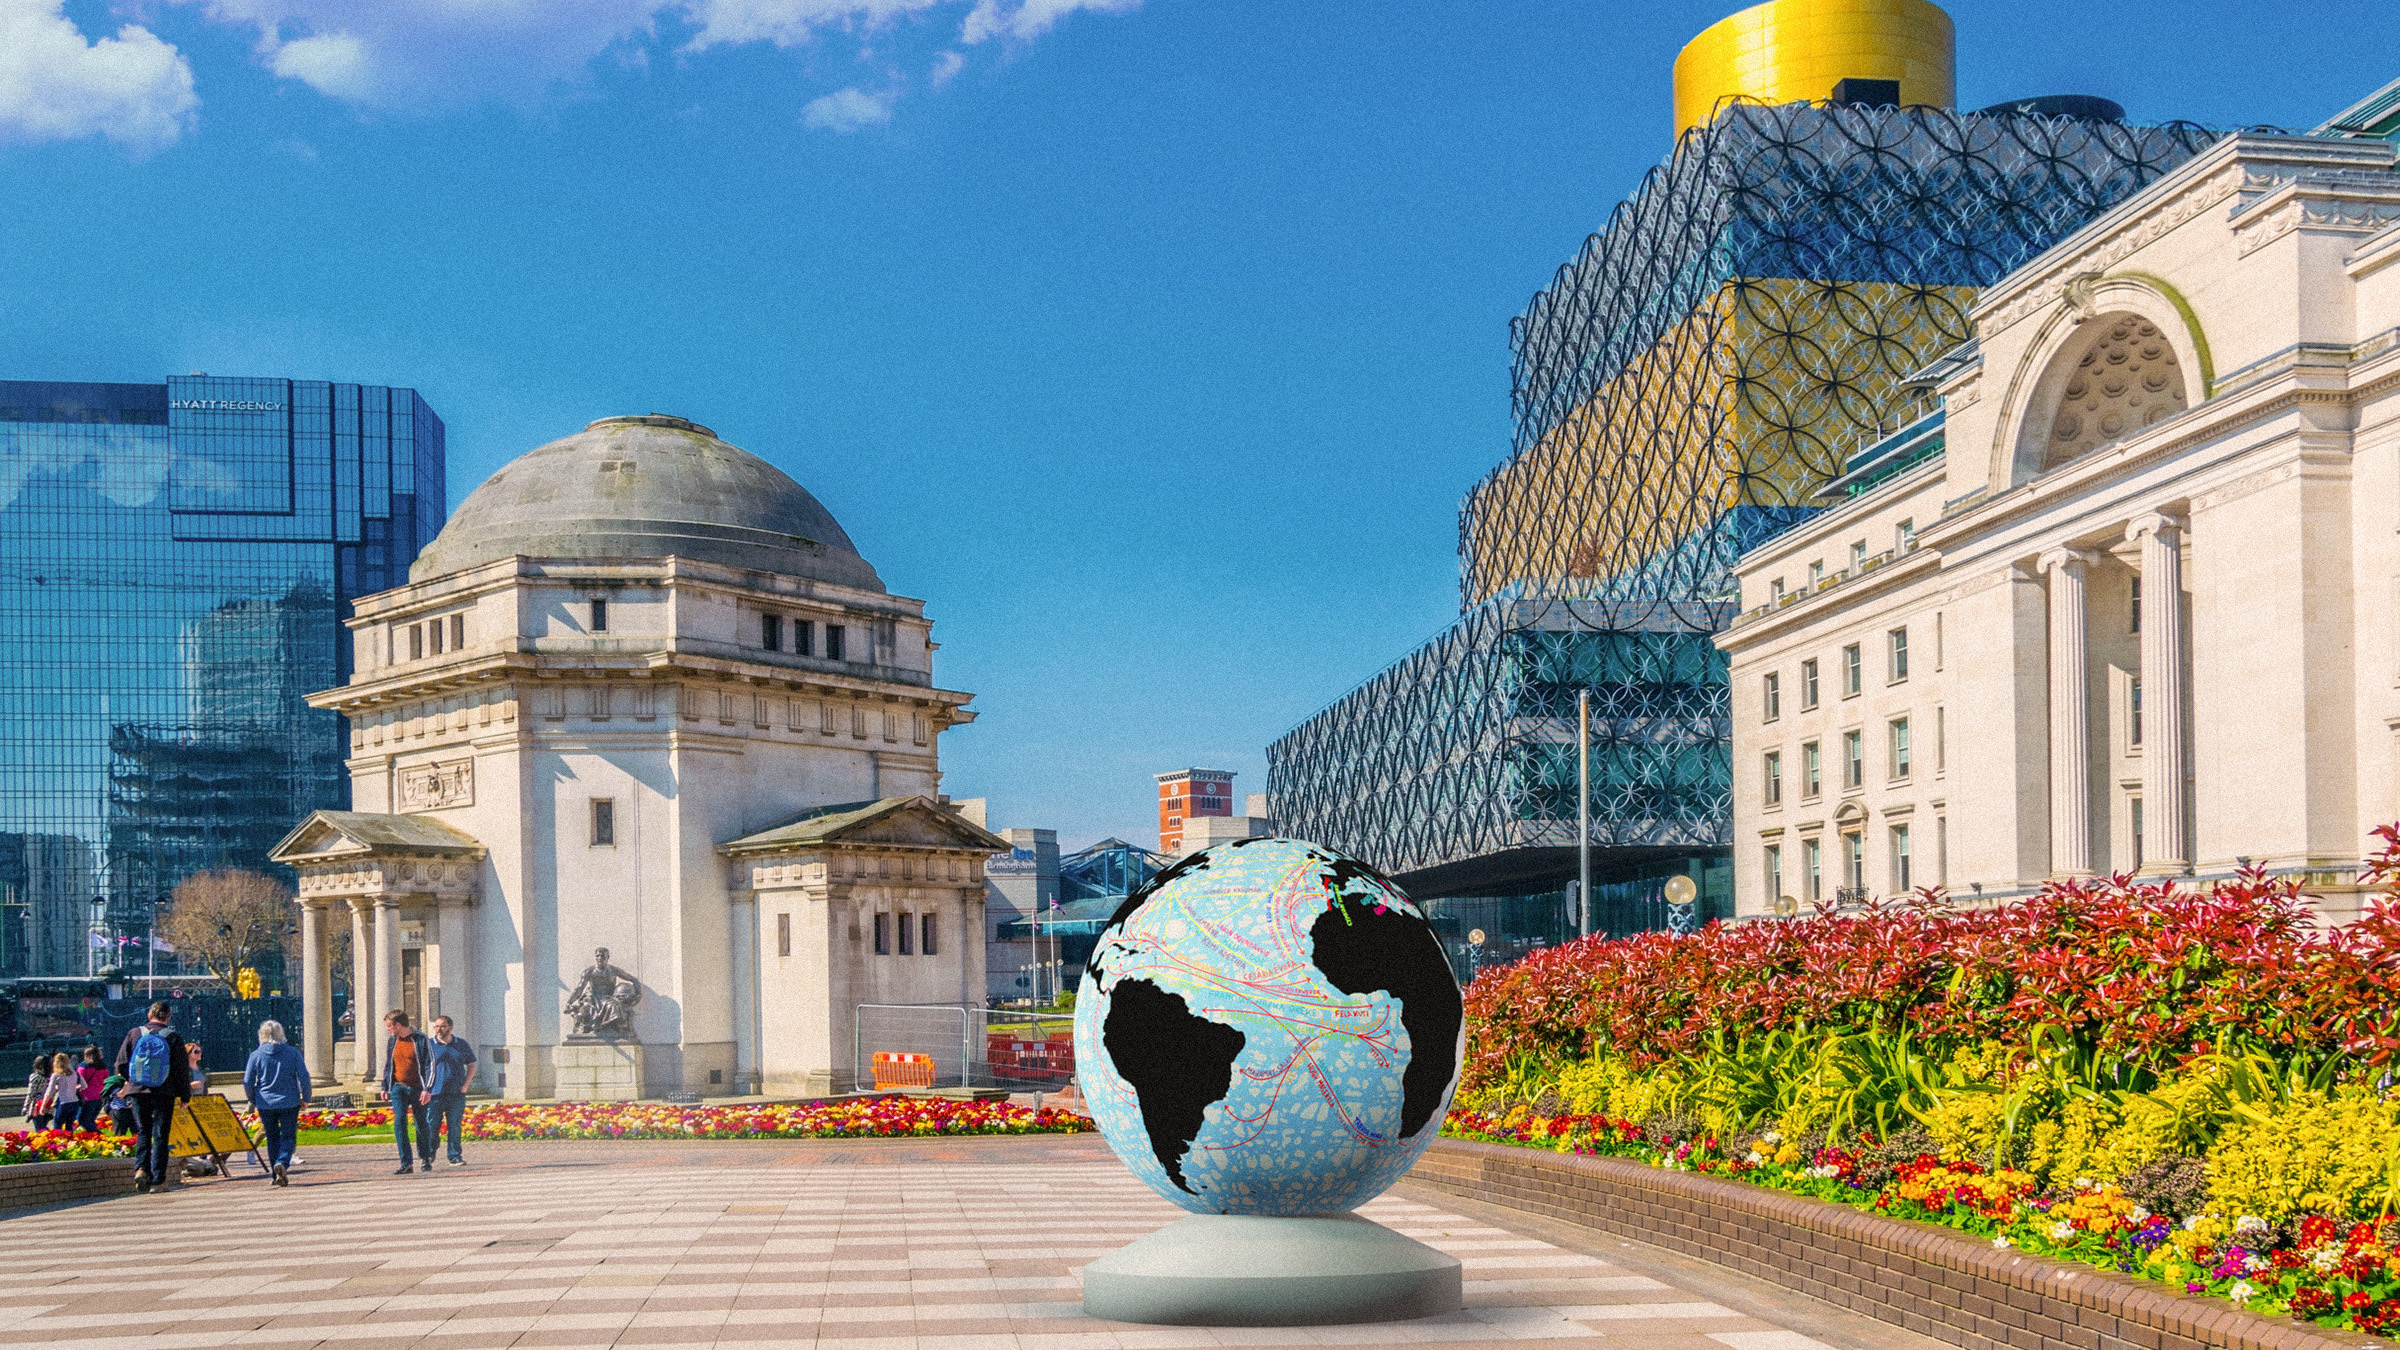 An artists impression of Yinka Shonibare globe in a city centre.